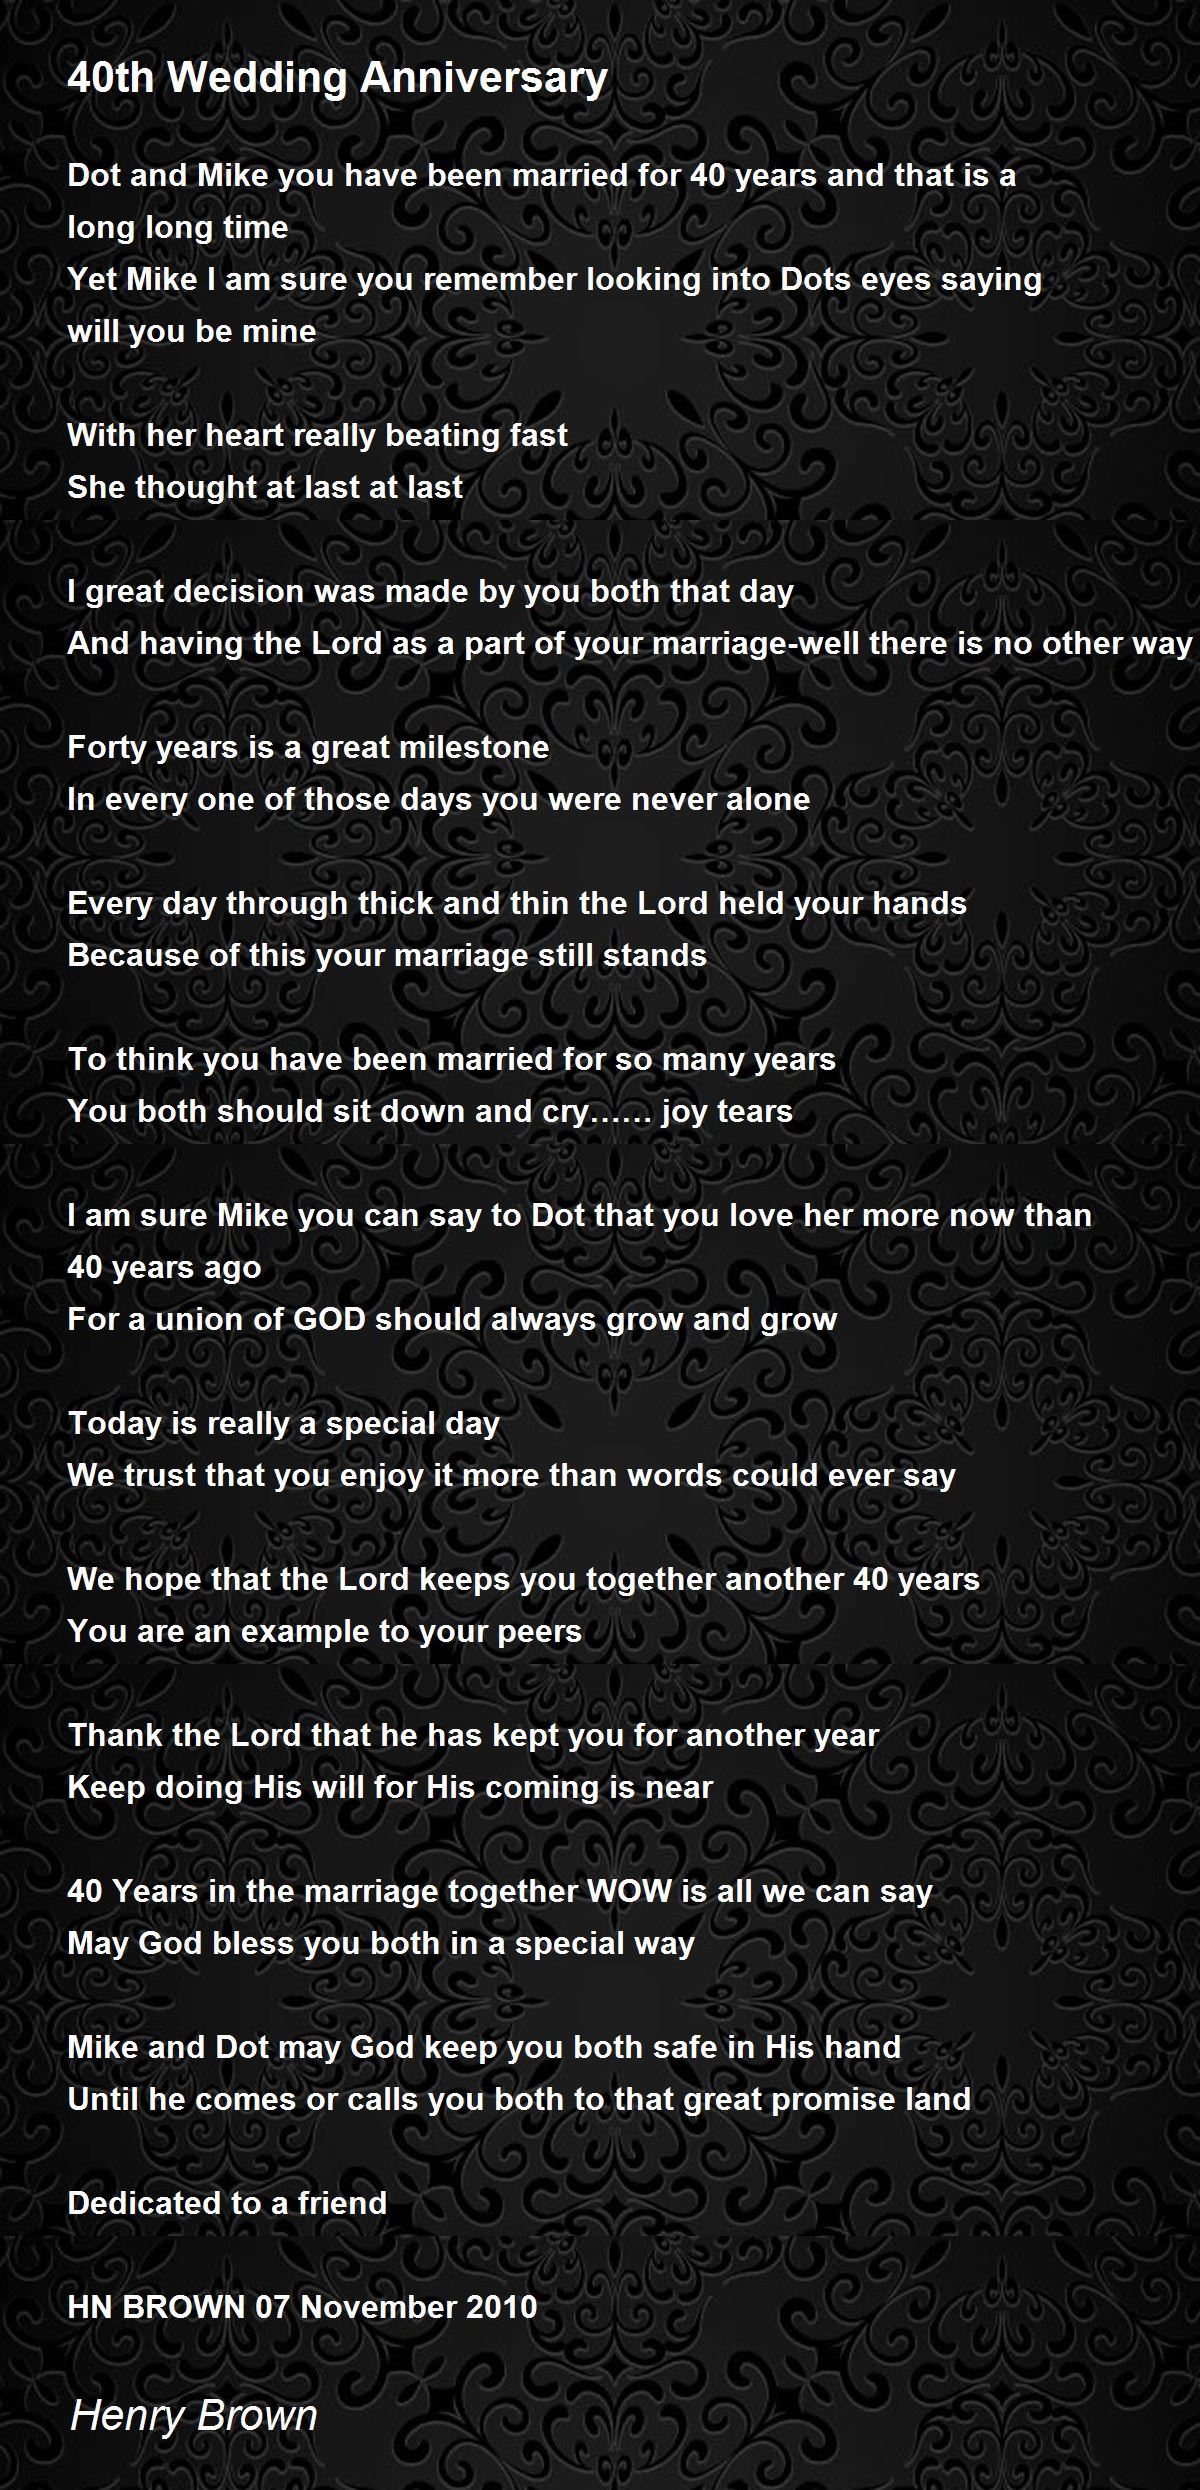 40th Wedding Anniversary - 40th Wedding Anniversary Poem by Henry Brown